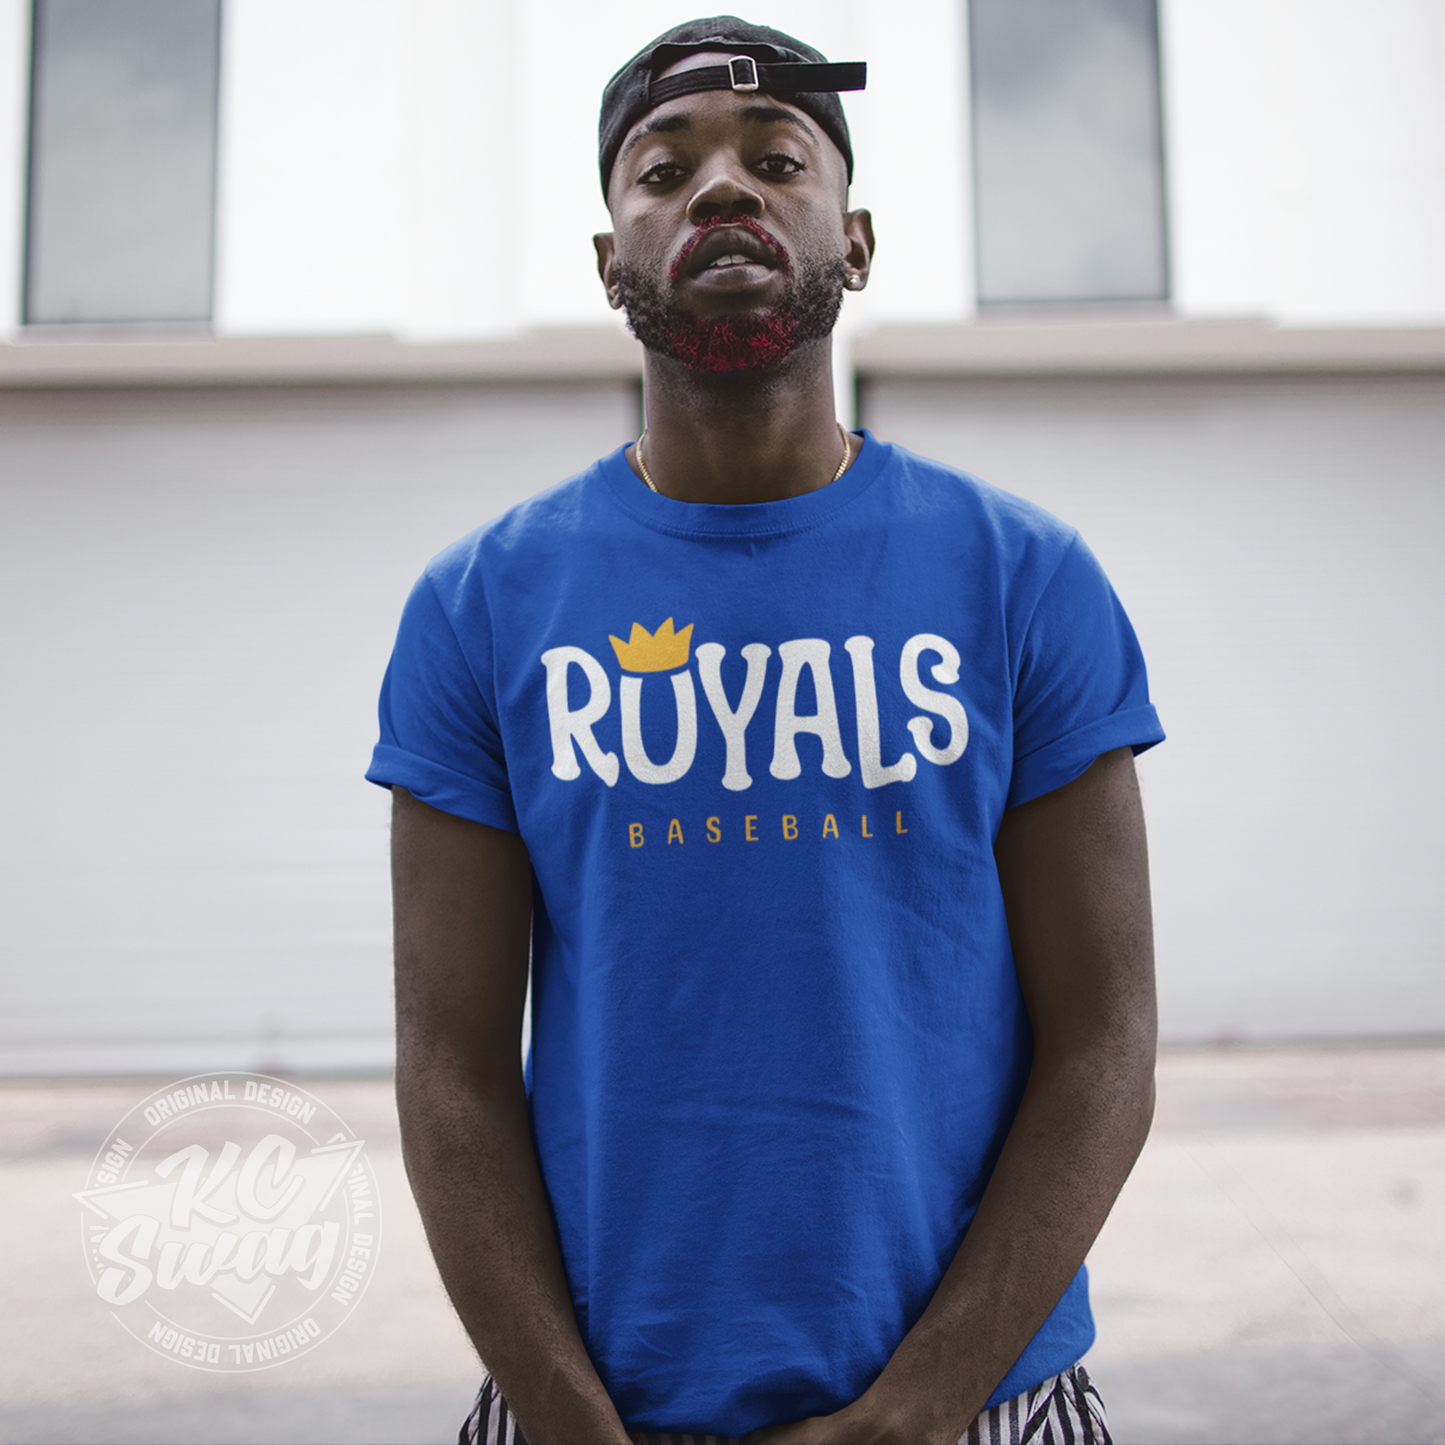 KC Swag - Kansas City Royals, Royals O-Crown design on royal blue unisex t-shirt worn by male model standing in an urban alley with a backwards baseball cap